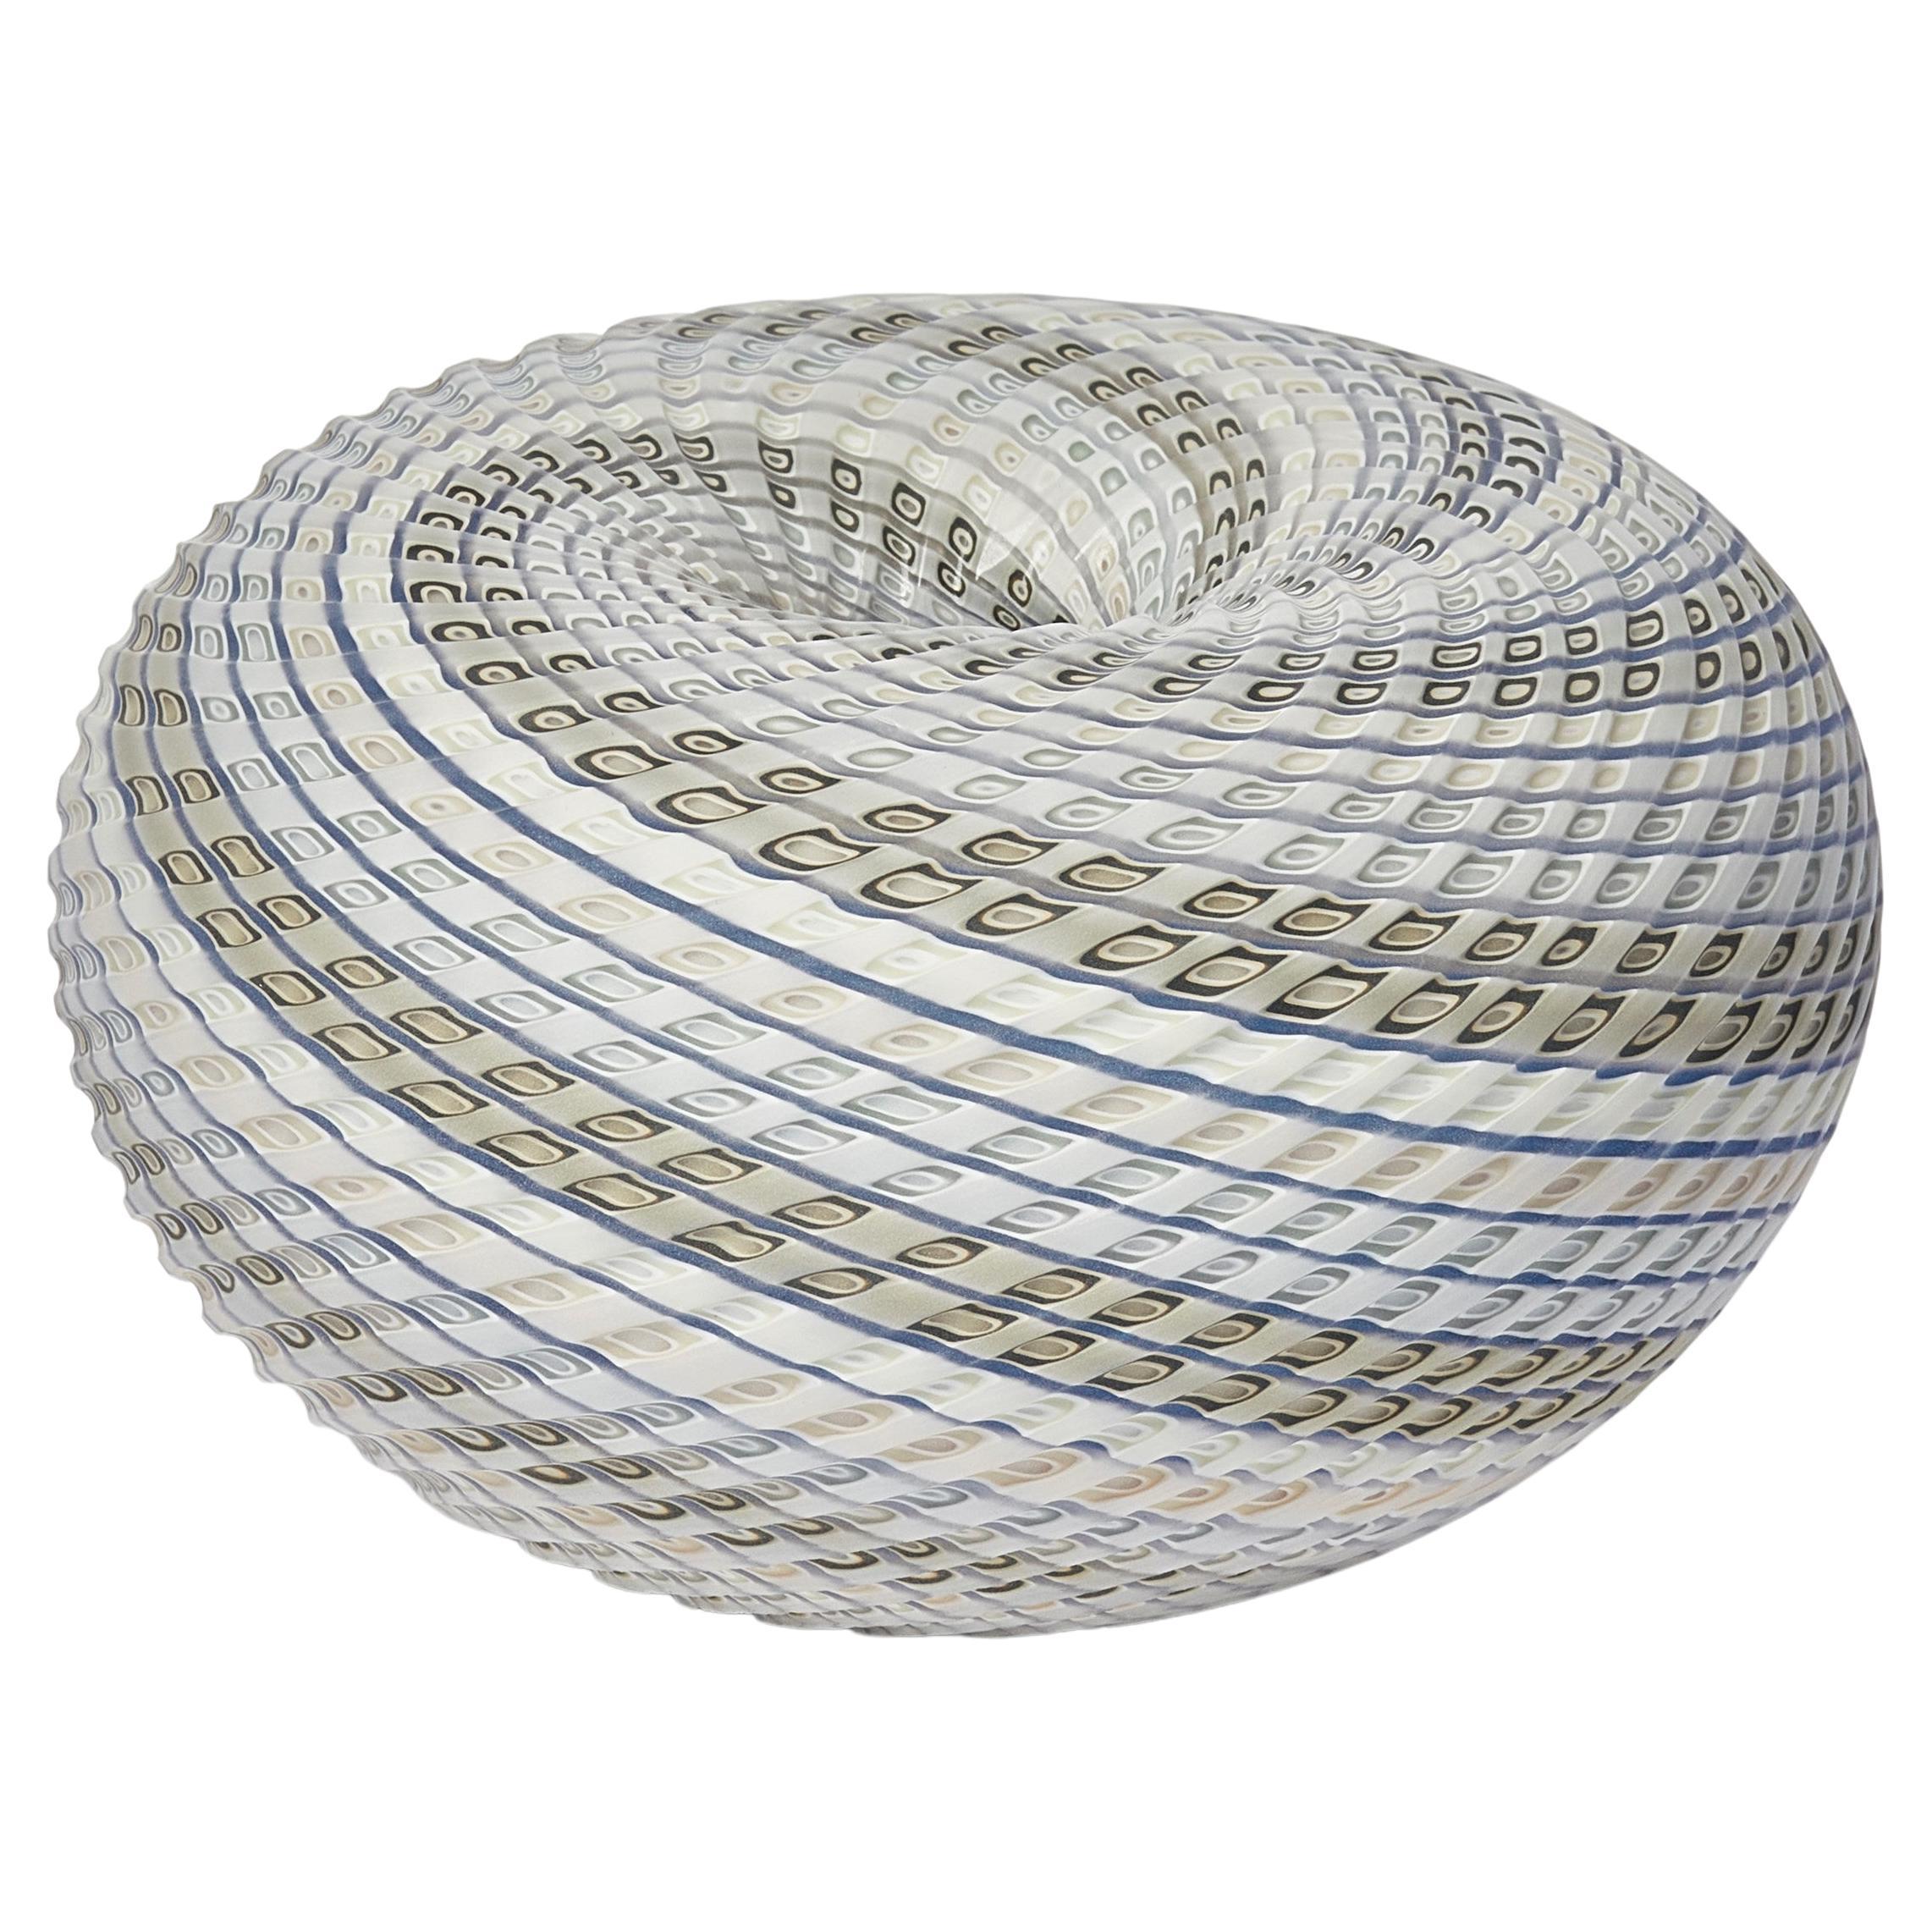 Woven Three Tone Blue Basket, textured glass sculptural object by Layne Rowe For Sale